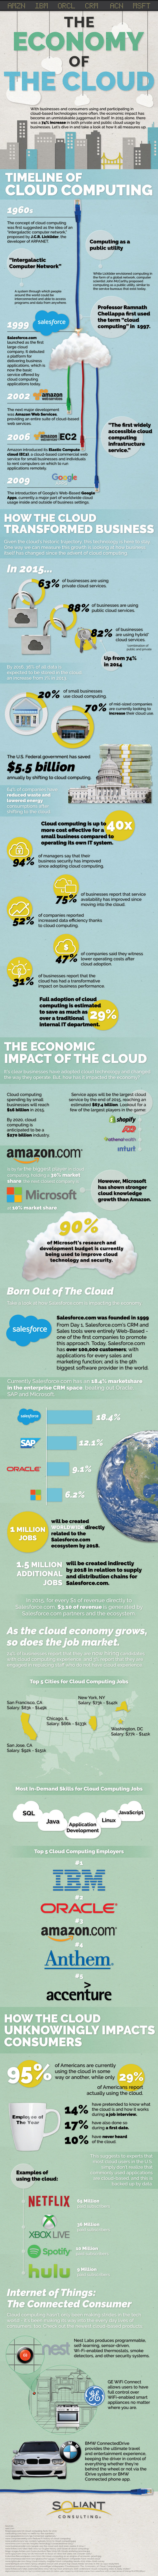 the economy of the cloud